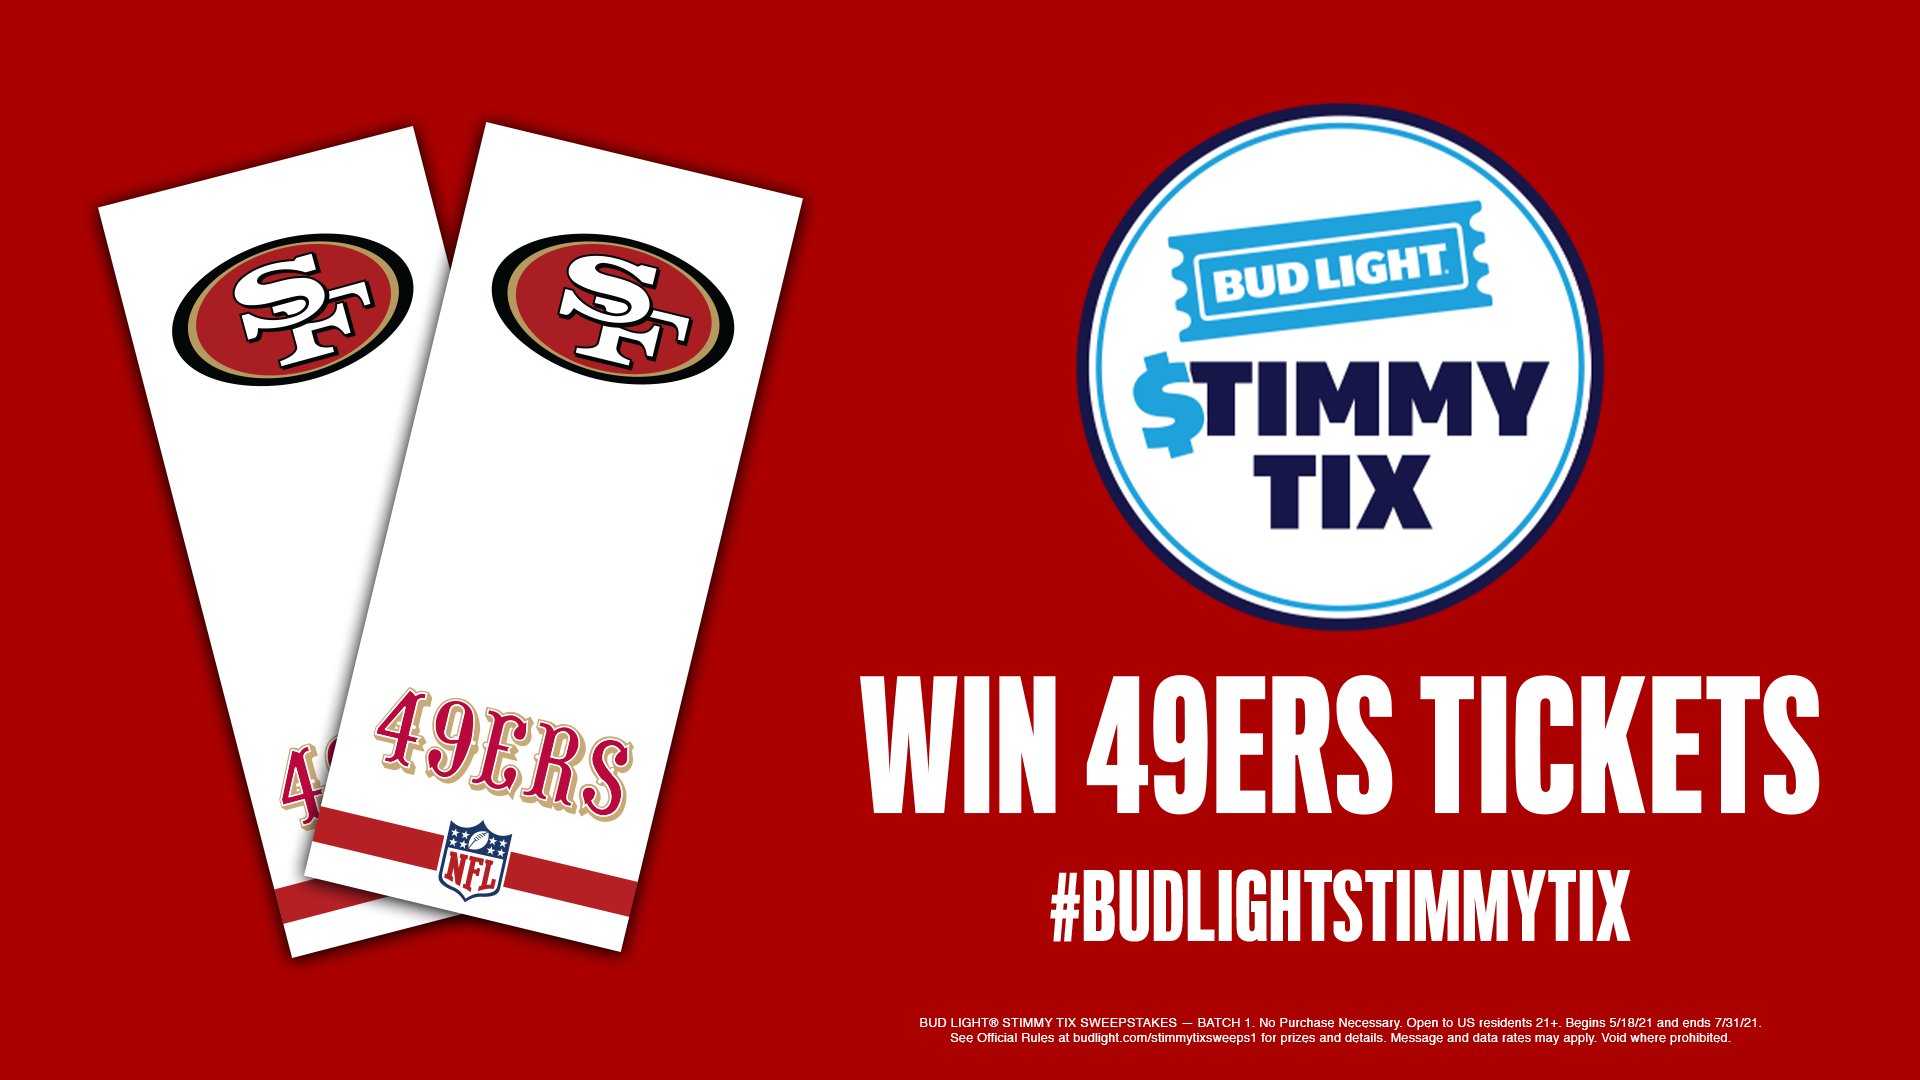 San Francisco 49ers on X: 'Faithful, the Bud Light Summer Stimmy's been  approved! First order of business? FREE tickets! Tweet #BudLightStimmyTix  #Sweepstakes and tag @49ers for a chance to win tickets to